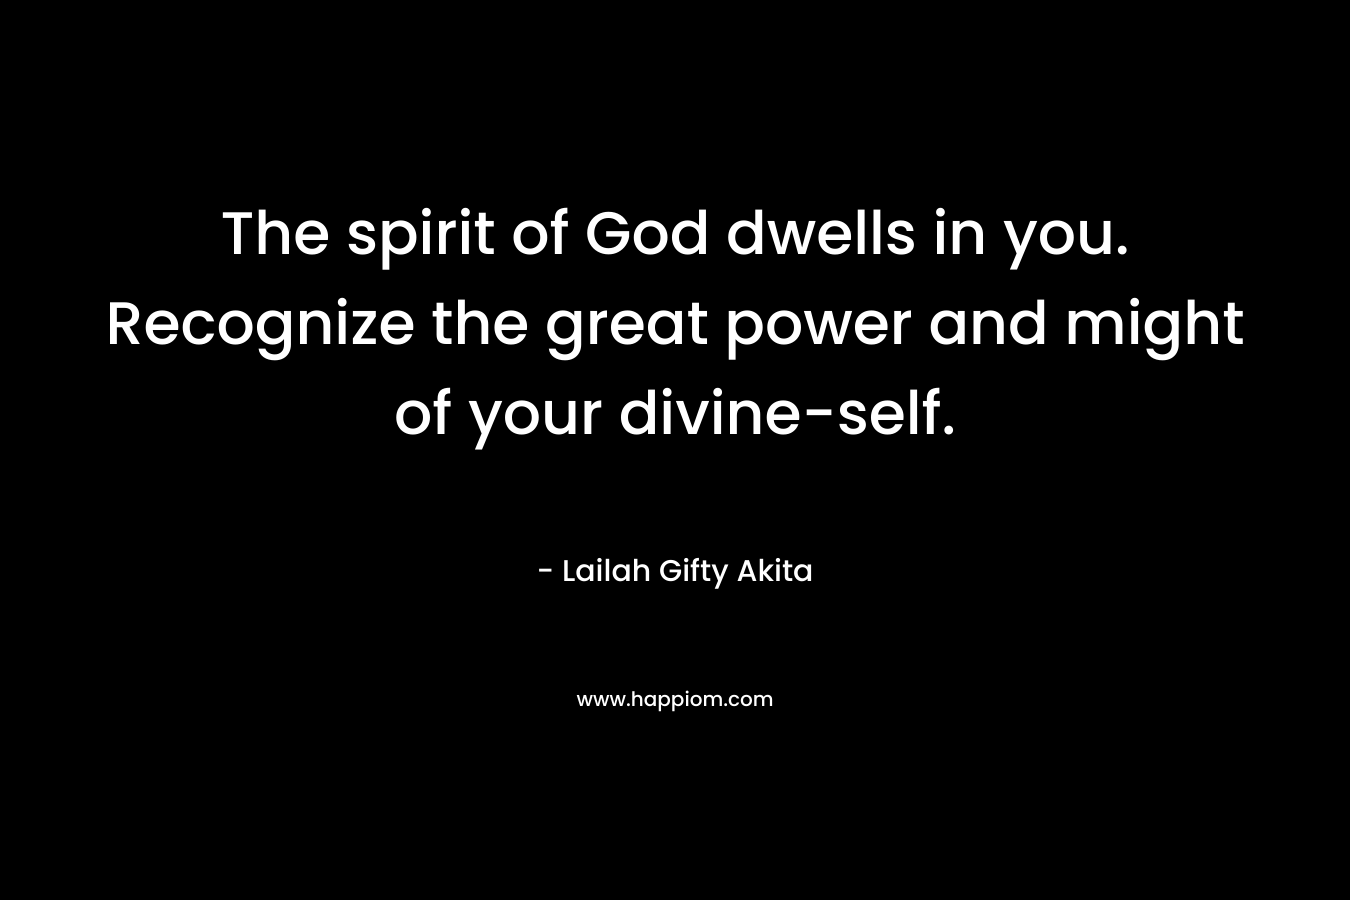 The spirit of God dwells in you. Recognize the great power and might of your divine-self.